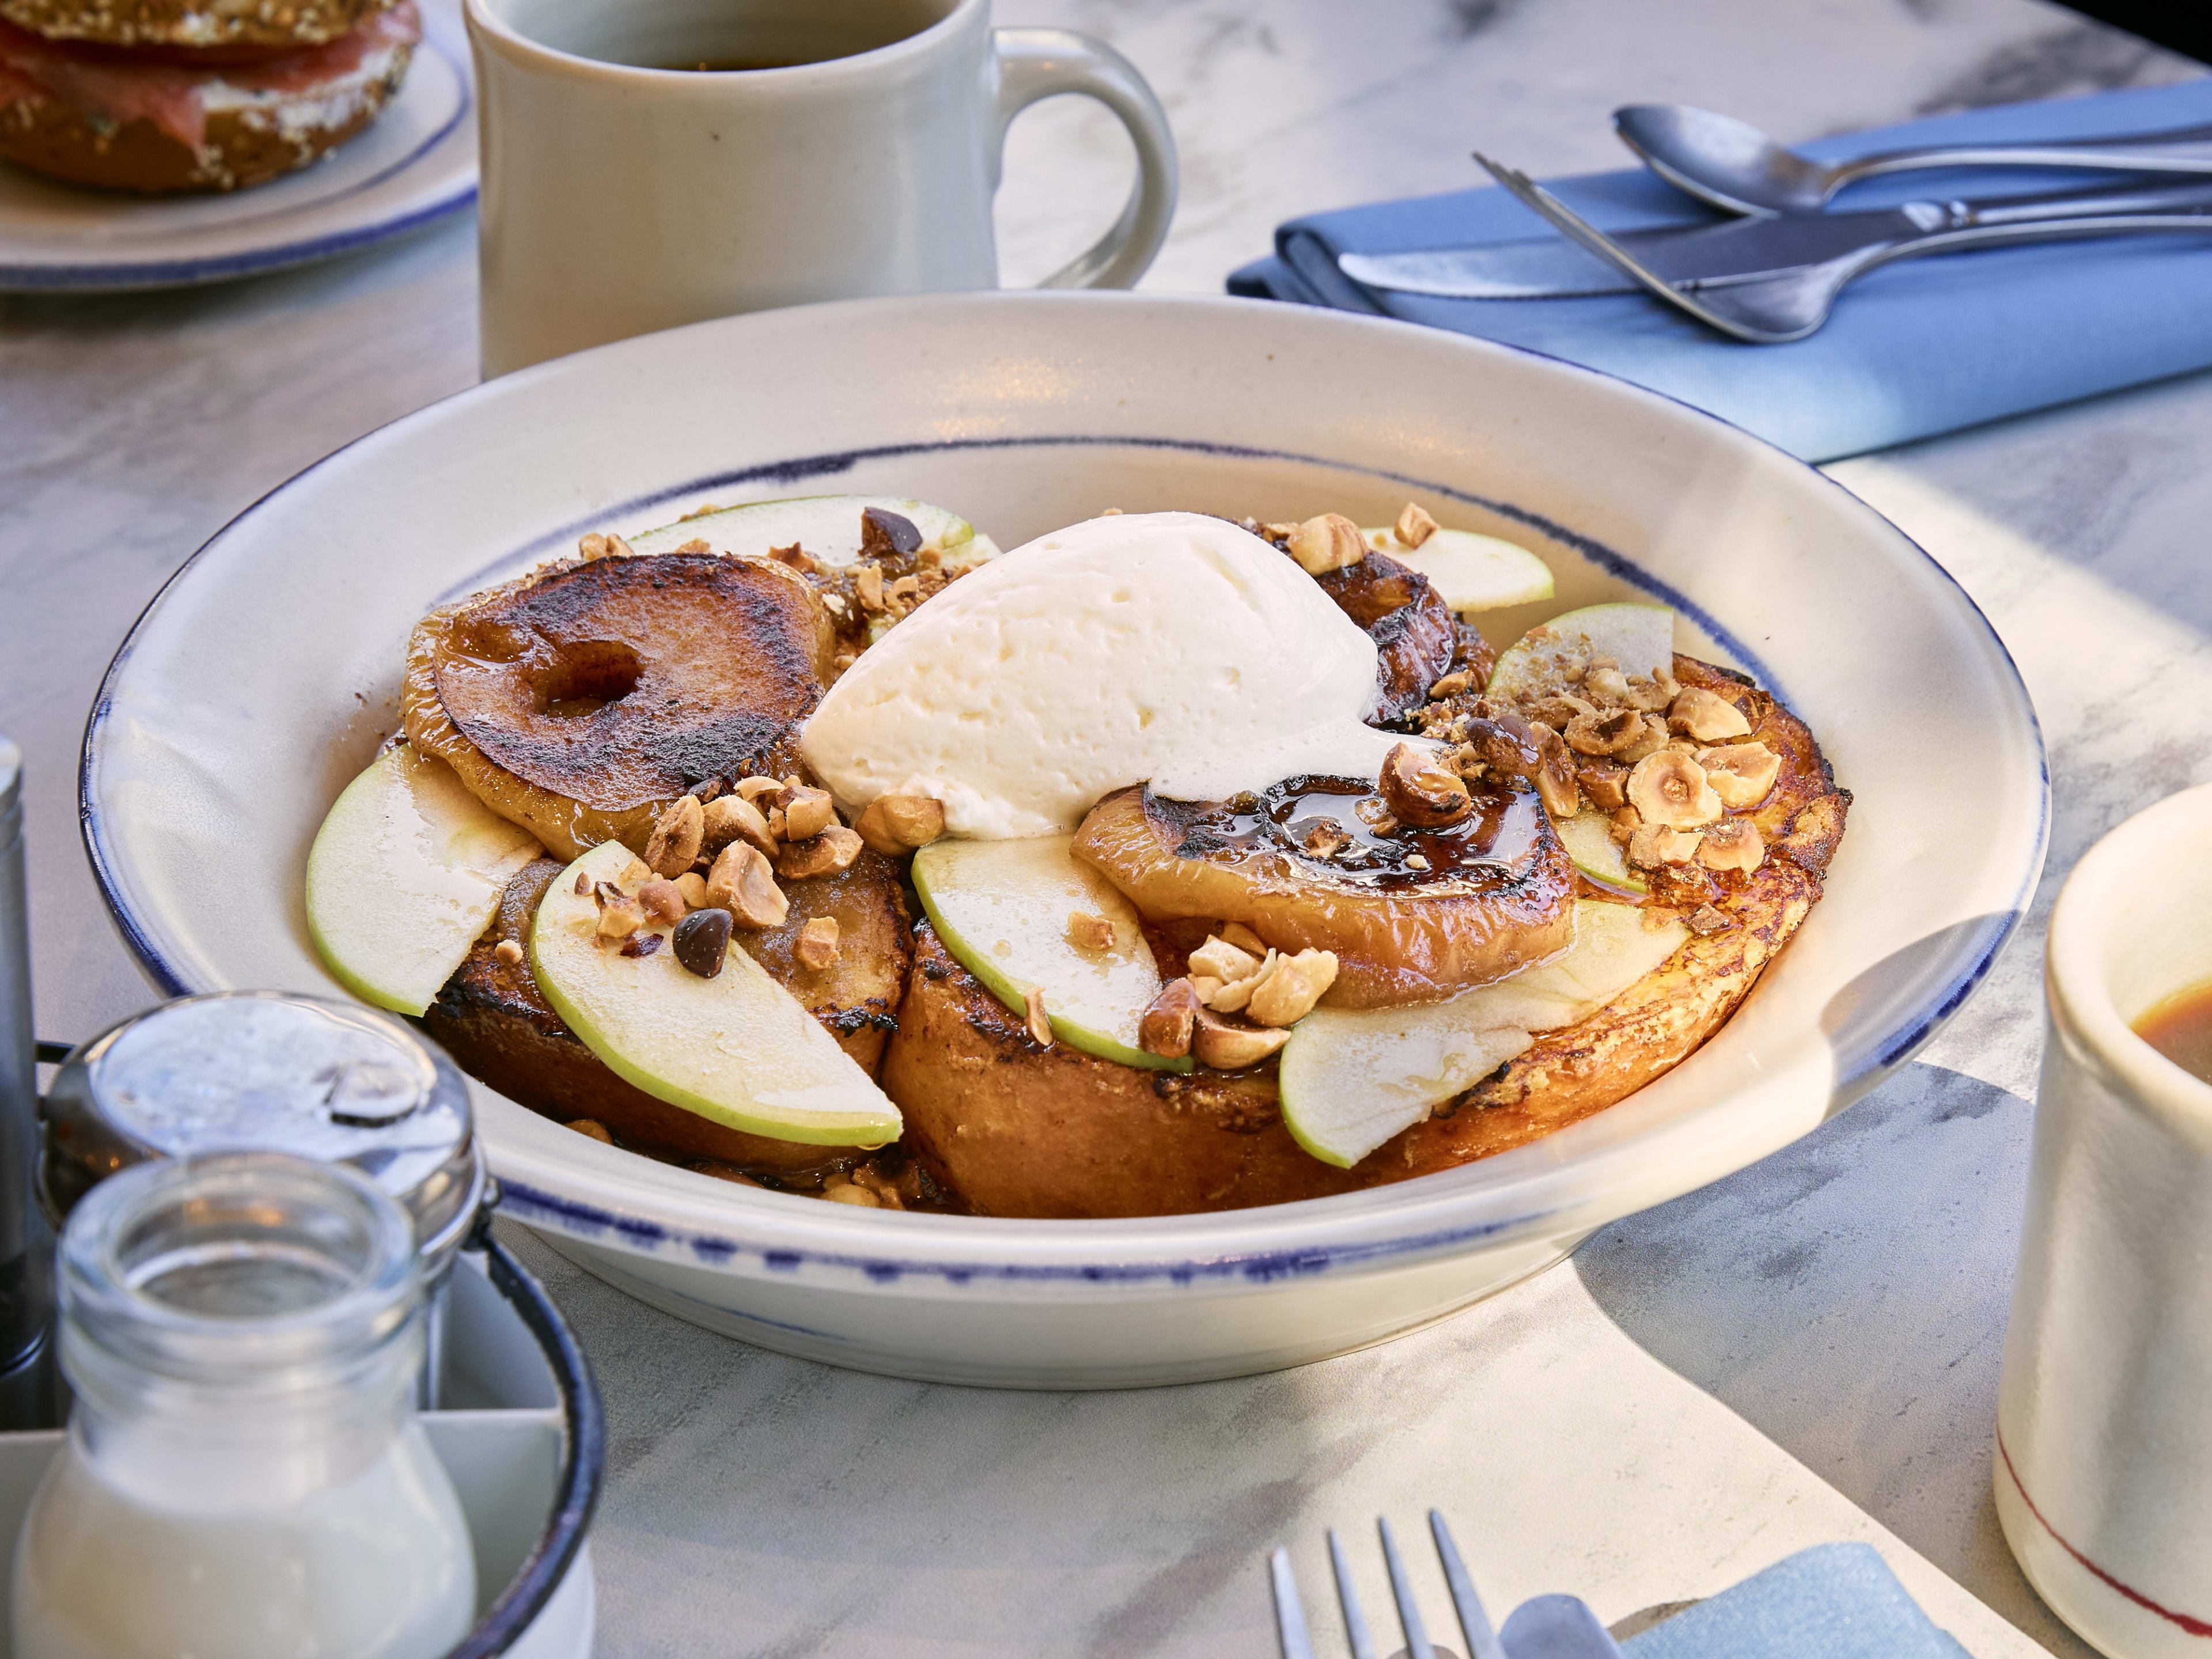 The apple french toast at Early To Rise